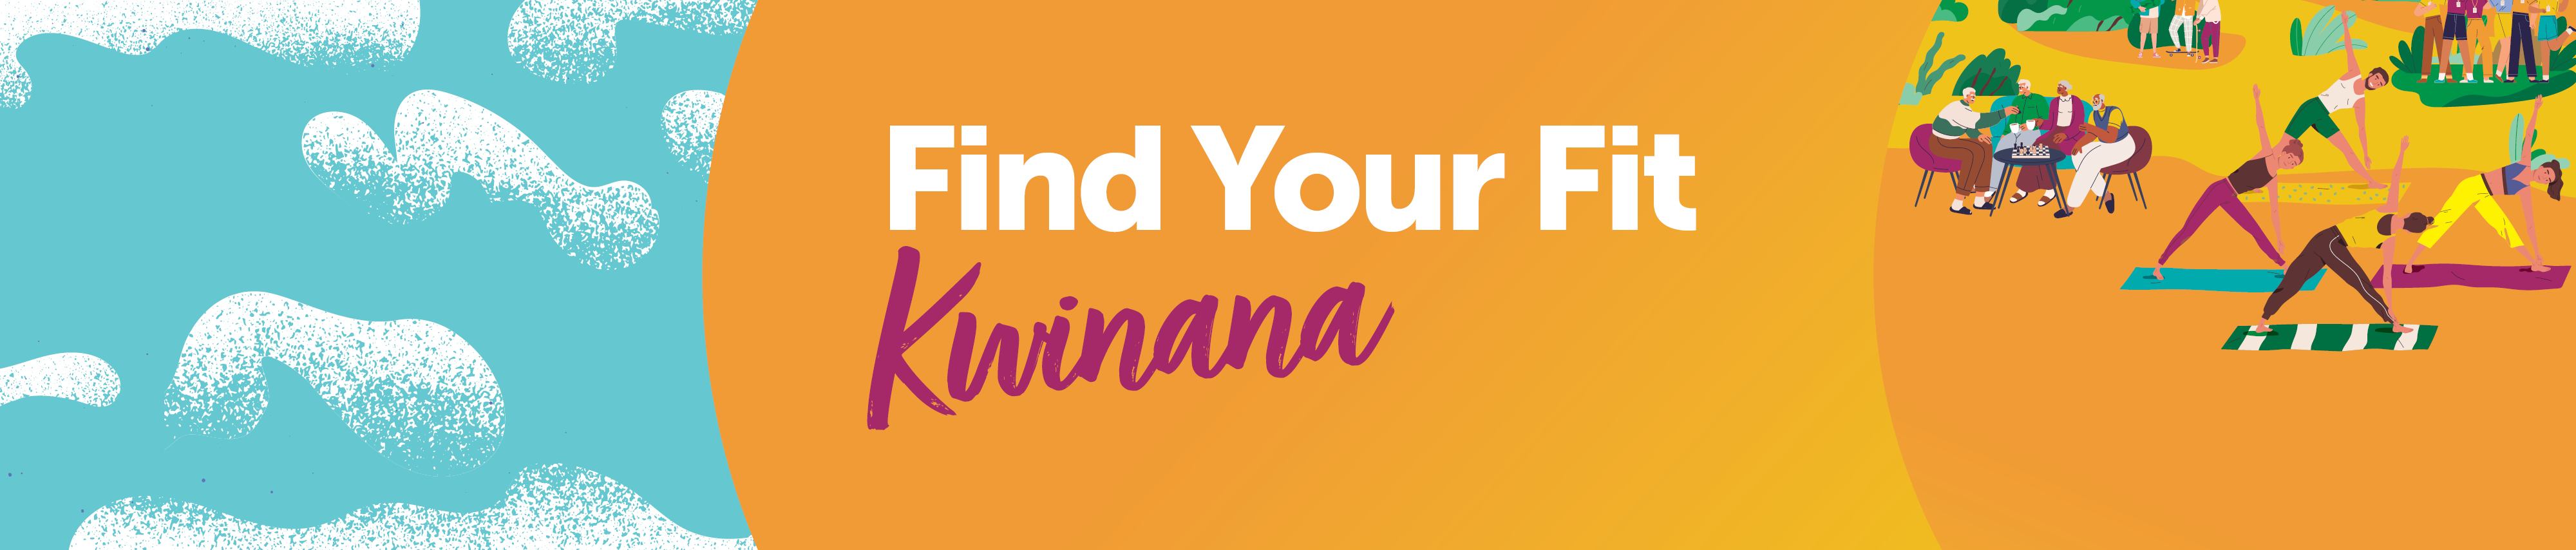 Find Your Fit Kwinana